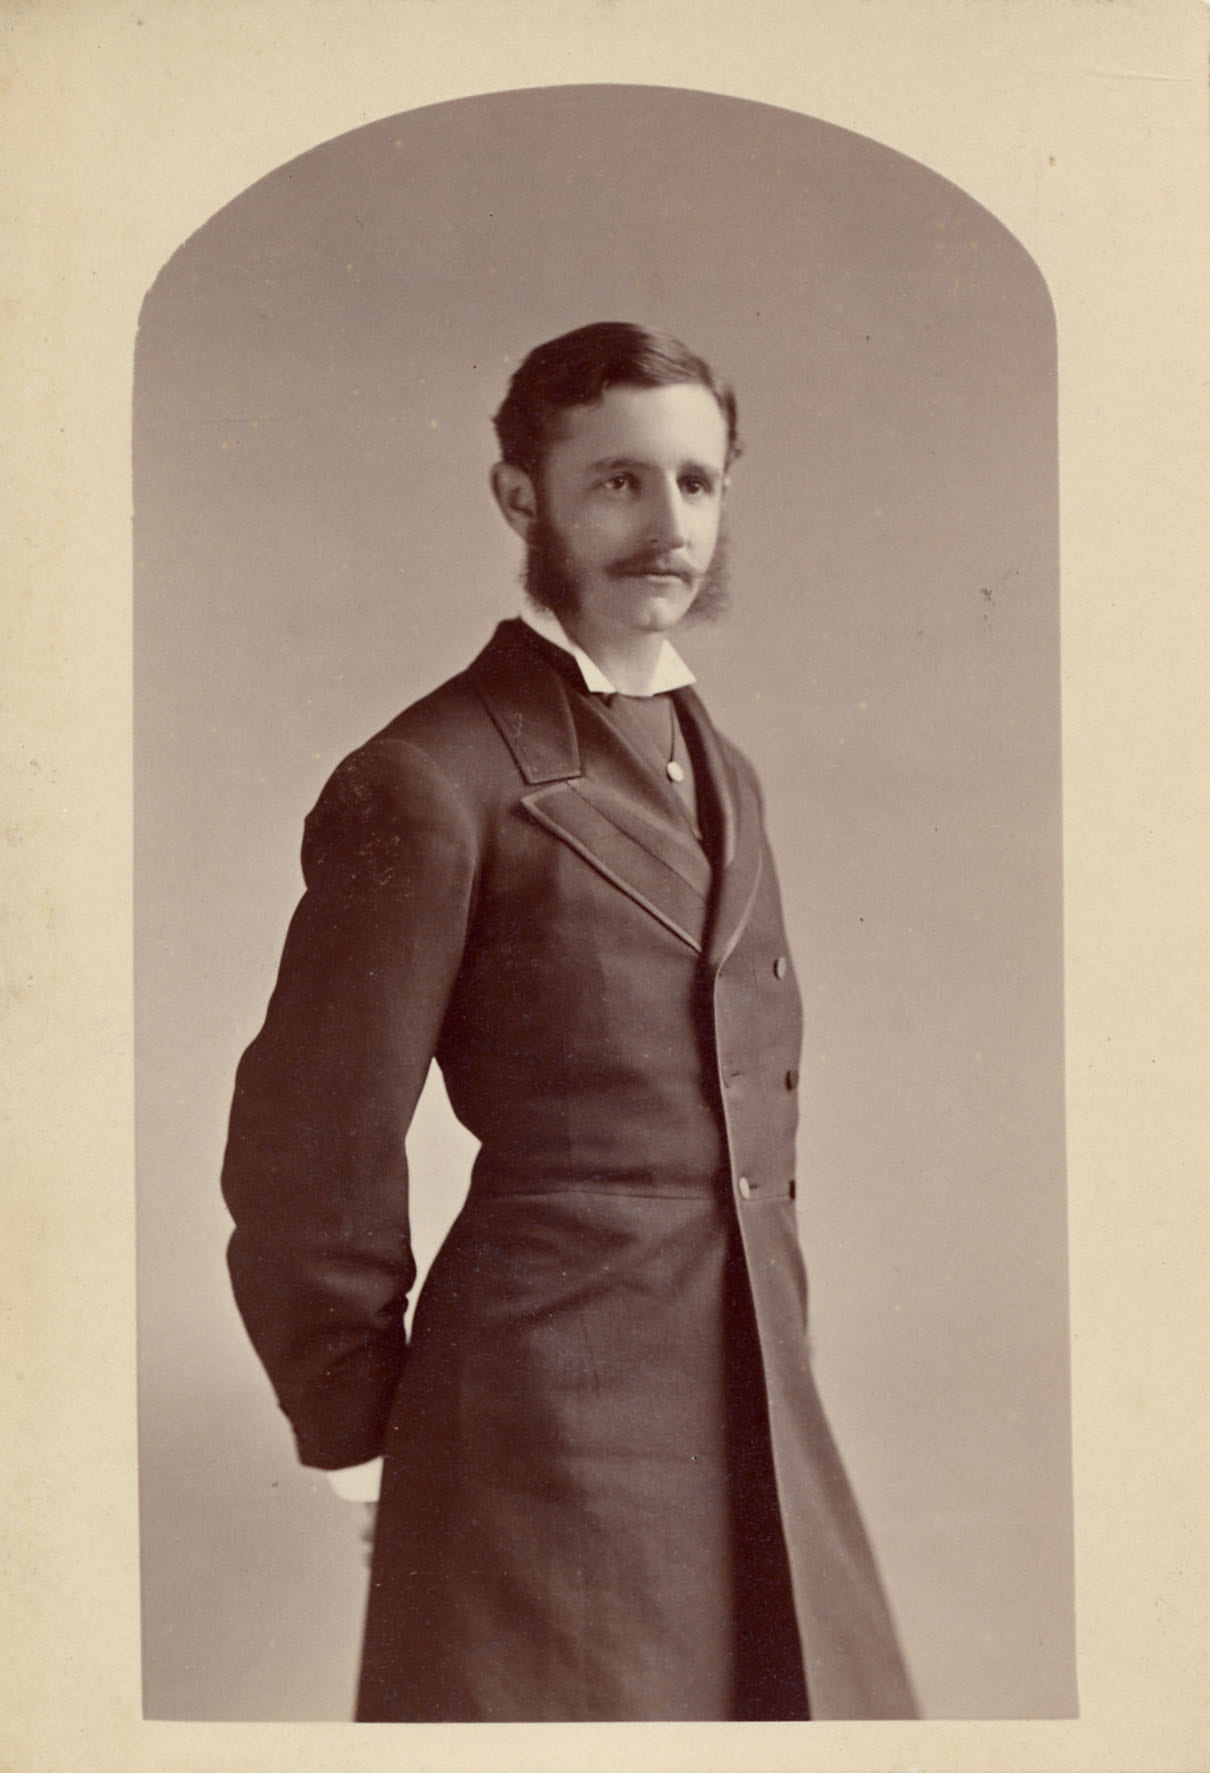 Cabinet card of Sam Bowles IV, ca. 1884-5, probably taken in connection with his marriage to Elizabeth Hoar of Concord, Mass.